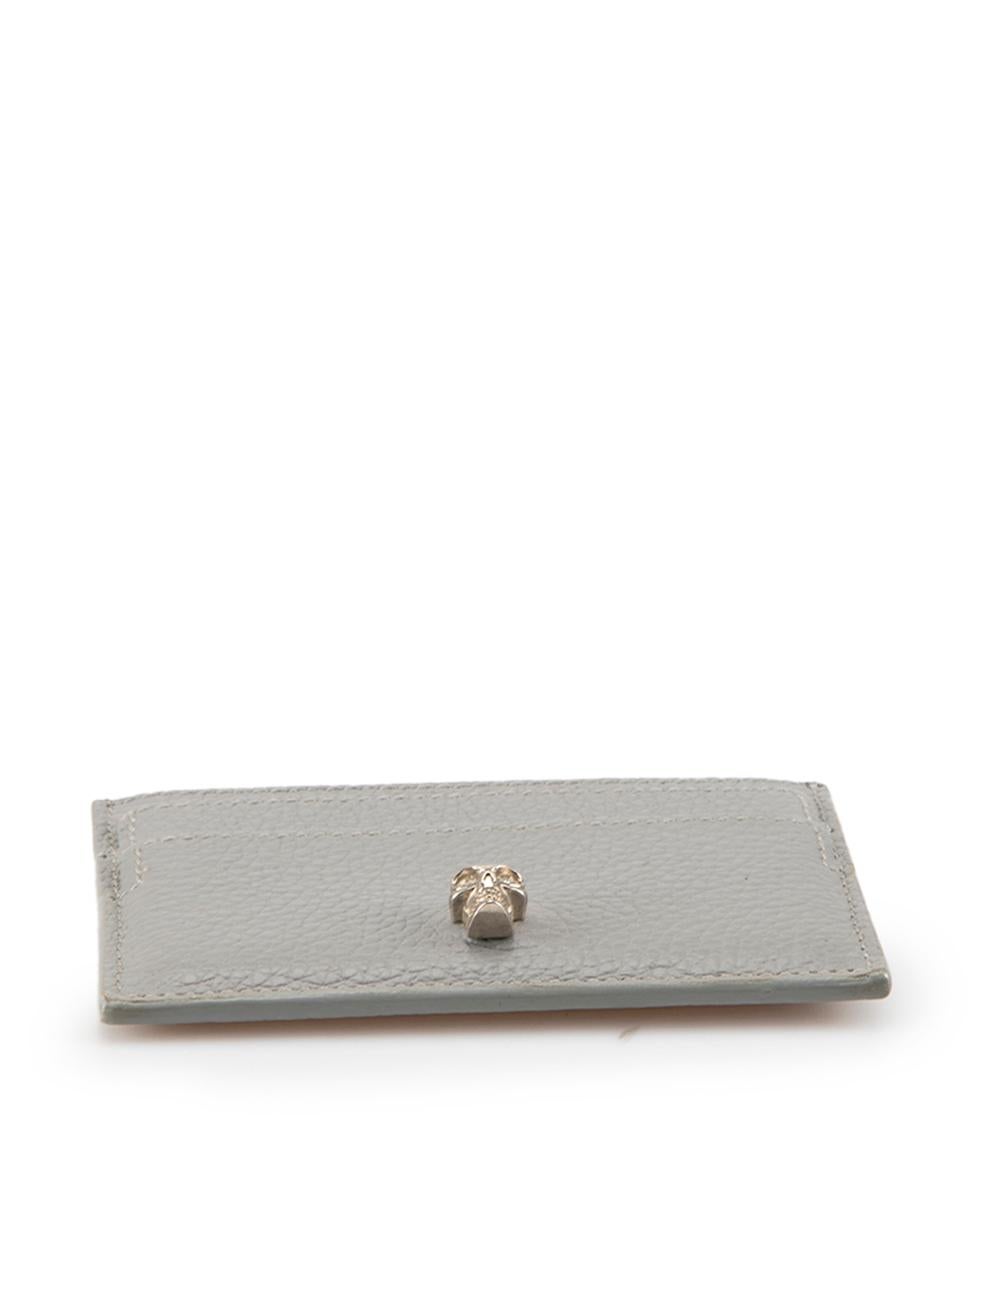 Alexander McQueen Grey Leather Skull Cardholder In Good Condition For Sale In London, GB